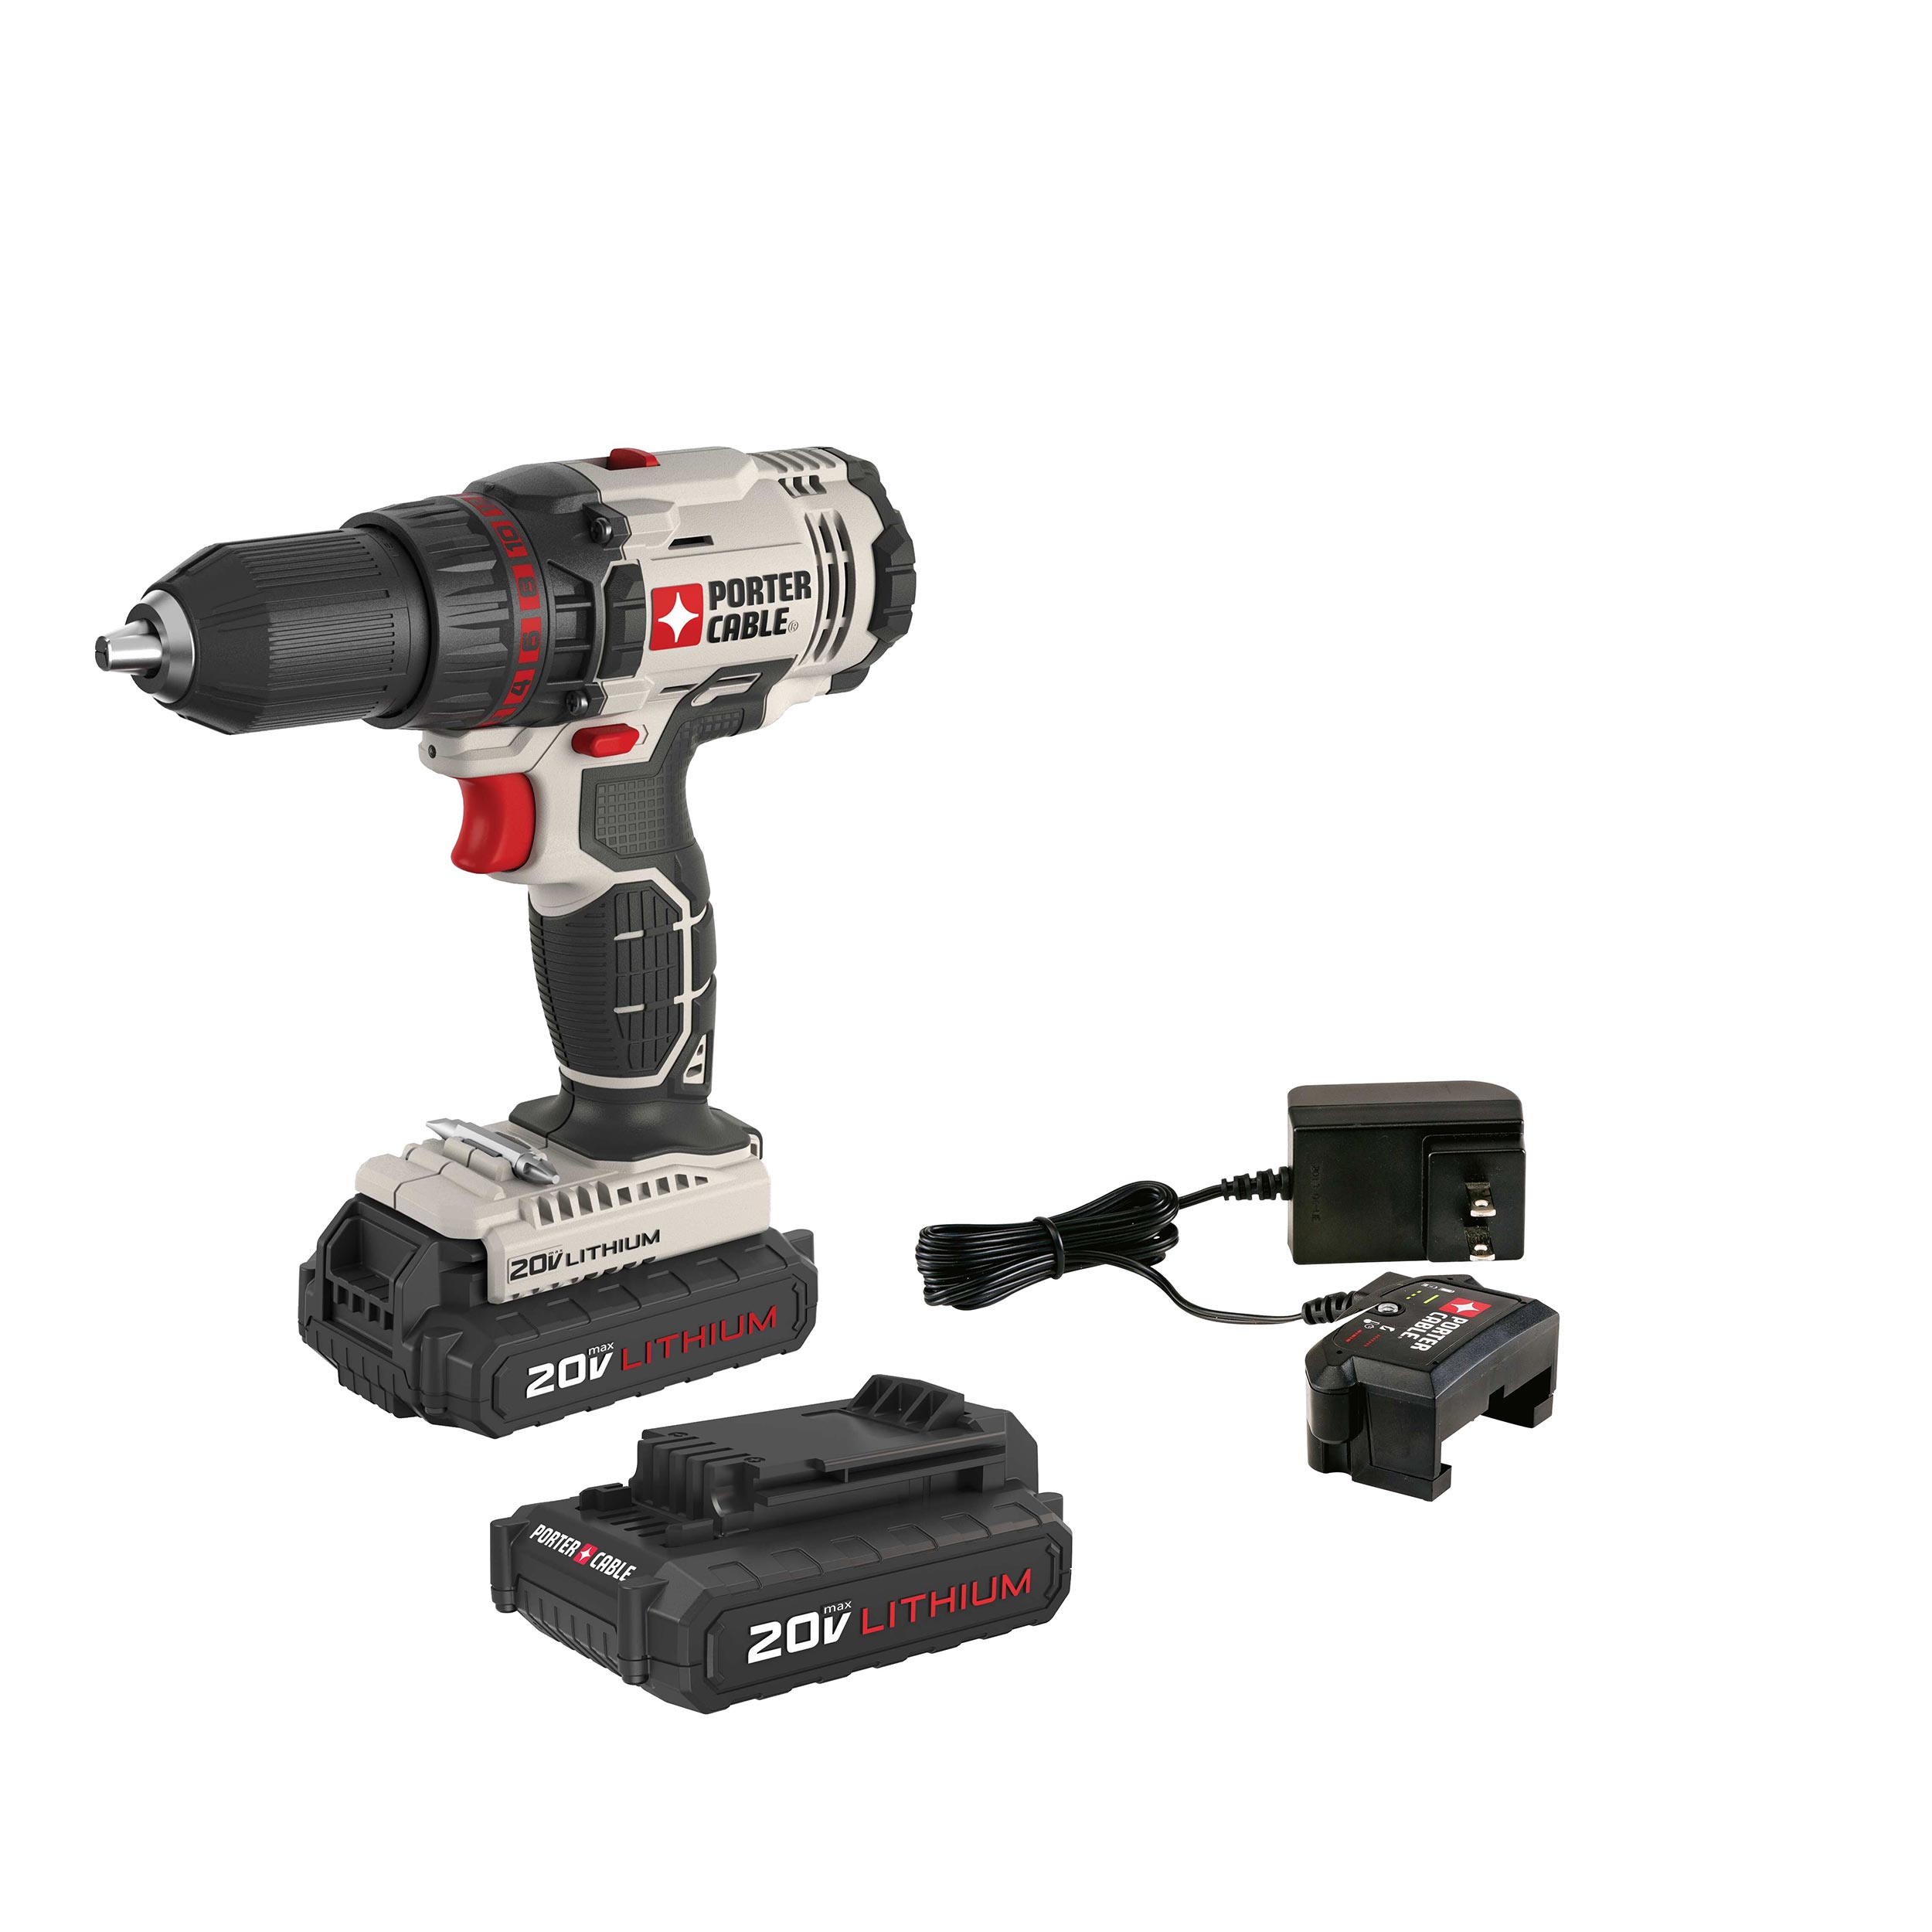 Porter-cable Pcc601lb 20-volt 1/2-inch Lithium Ion Drill/driver Kit